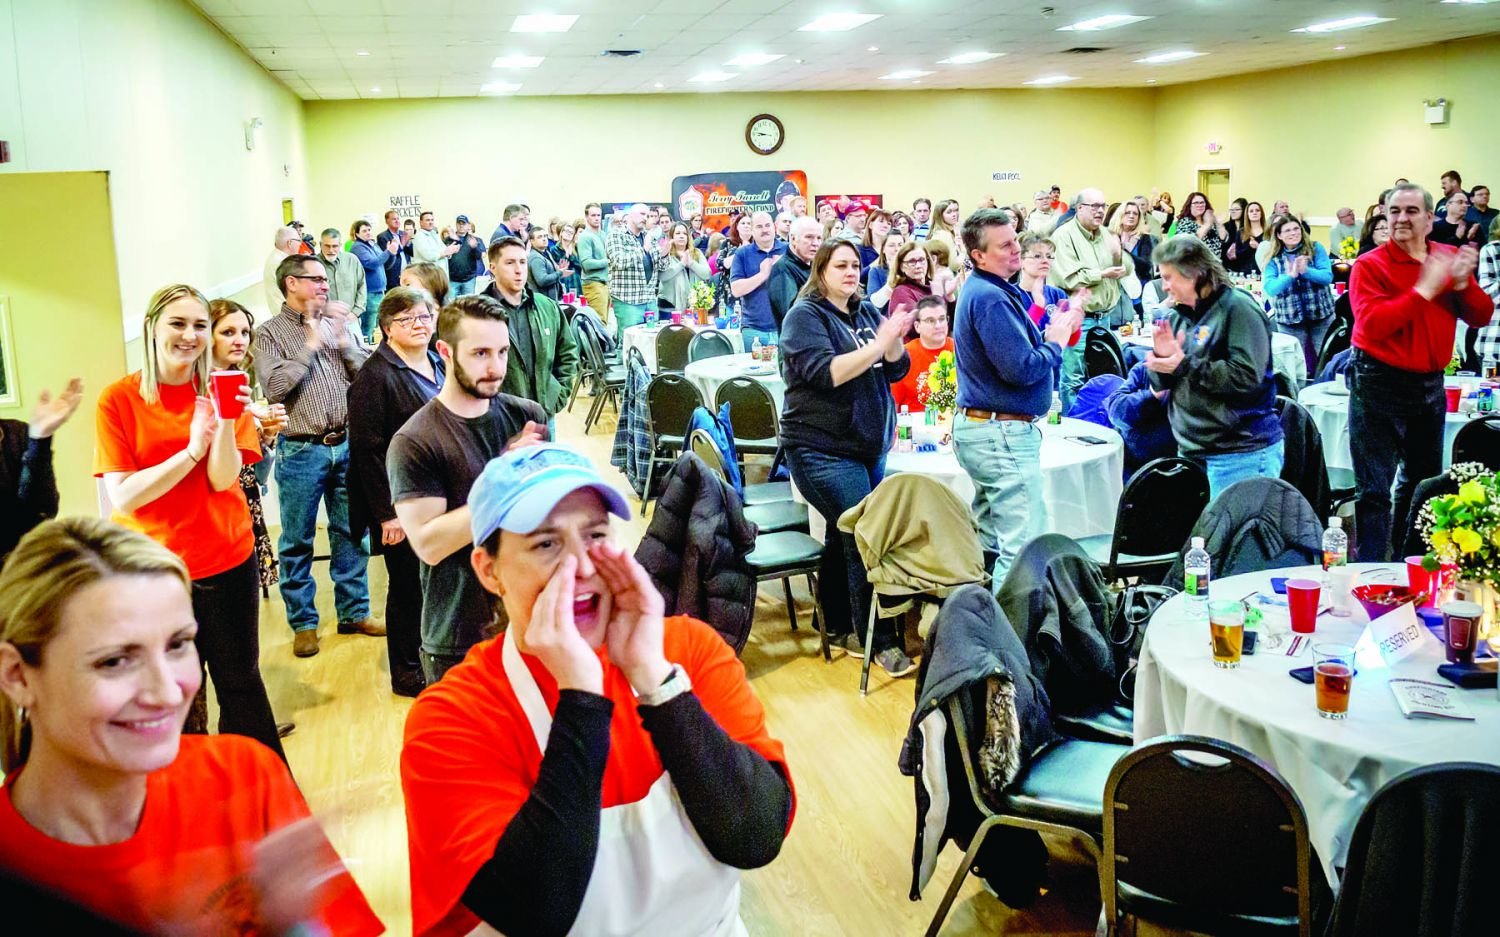 Friends, family and community members give a standing ovation for Steve Cronin, a Midway Volunter Fire Compay firefighter who was diagnosed with ALS in 2018. Photograph by Andrew Smith and Mark Smith.